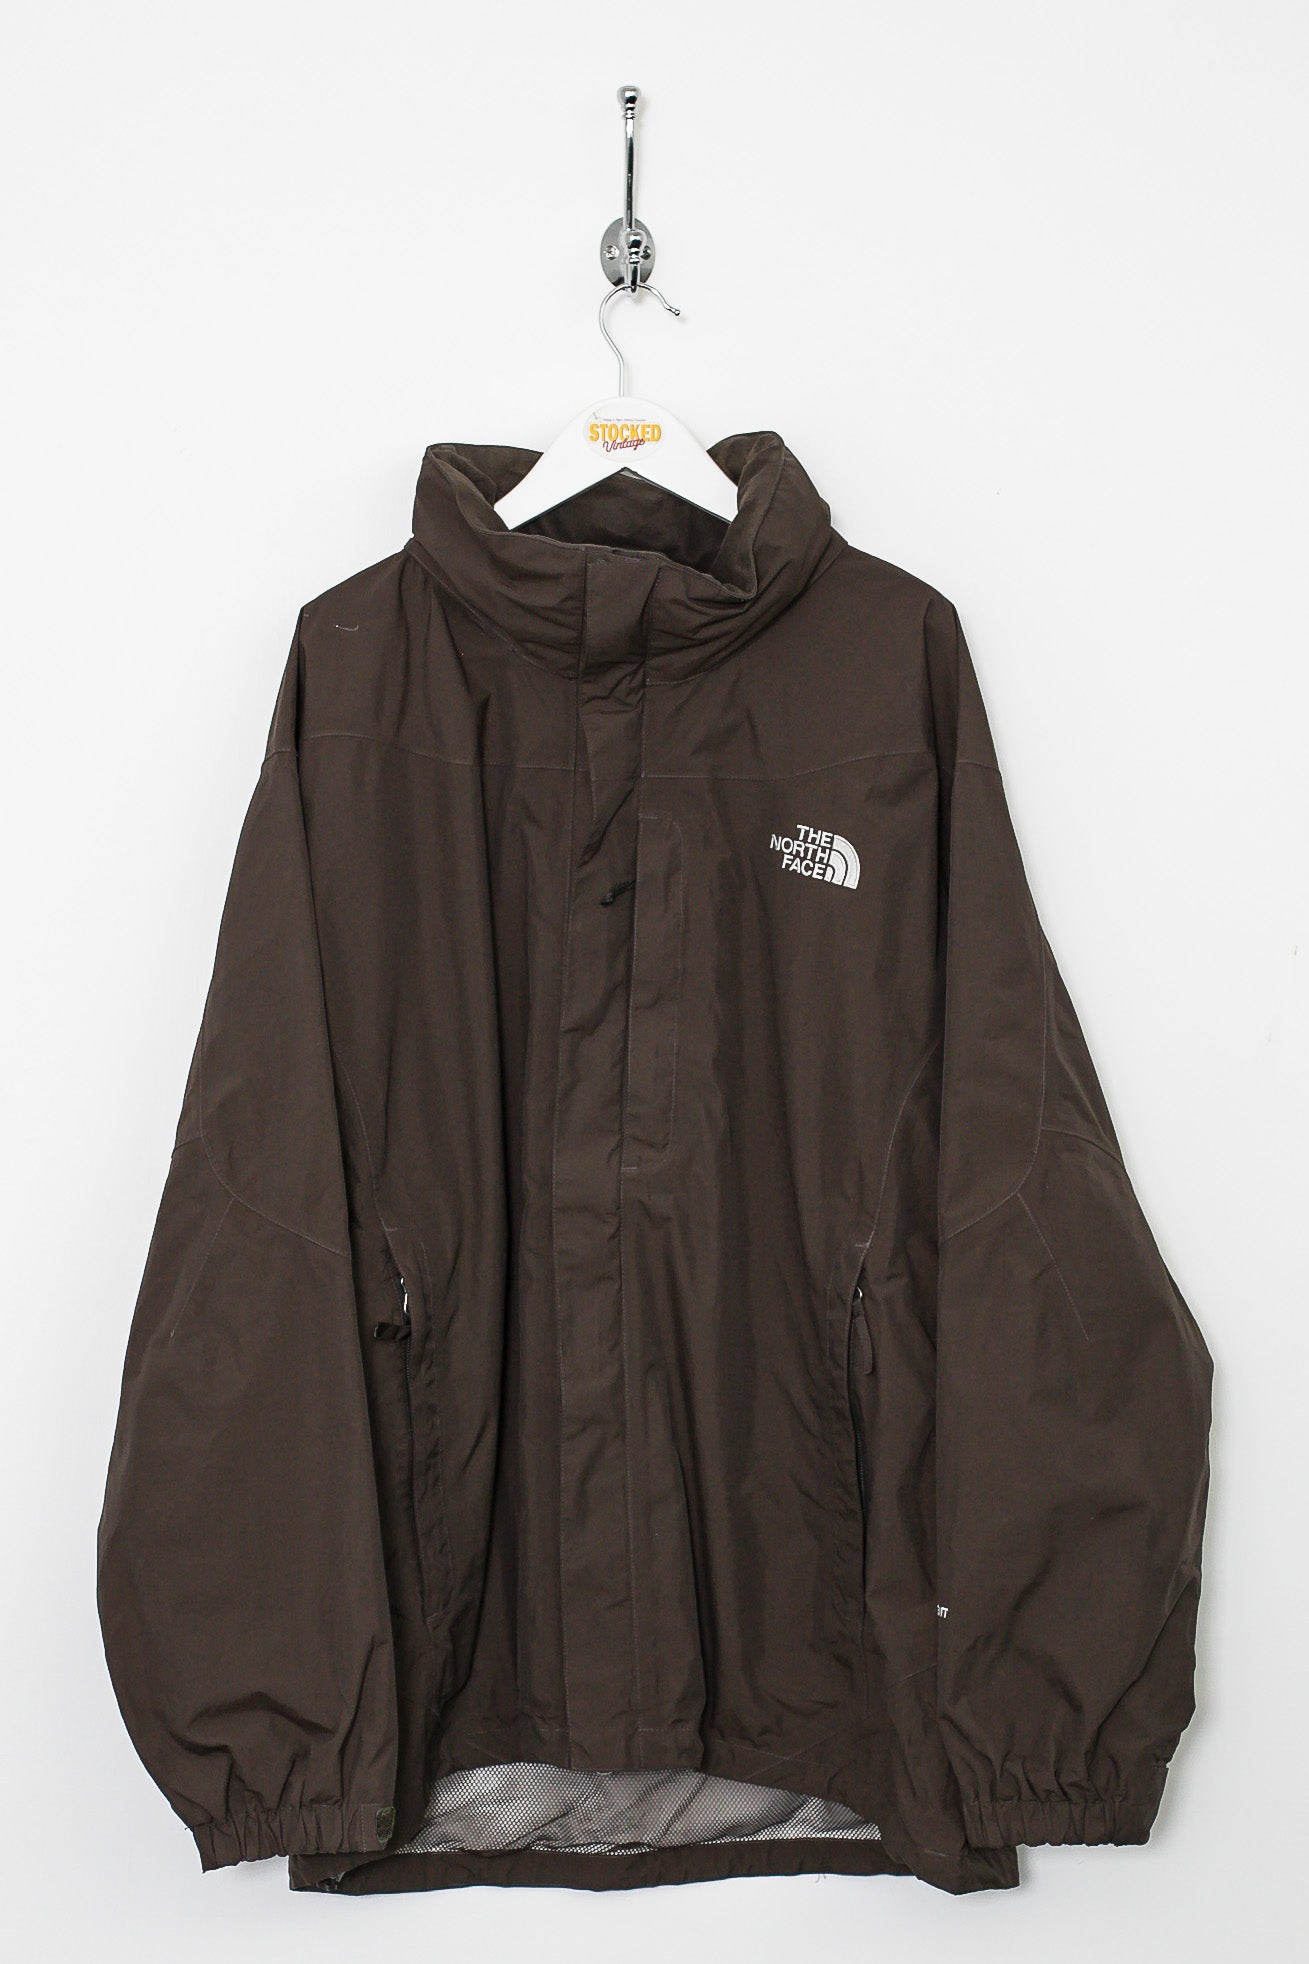 THE NORTH FACE◇HYVENT DOWN JACKET XL ナイロン GRN カモフラ